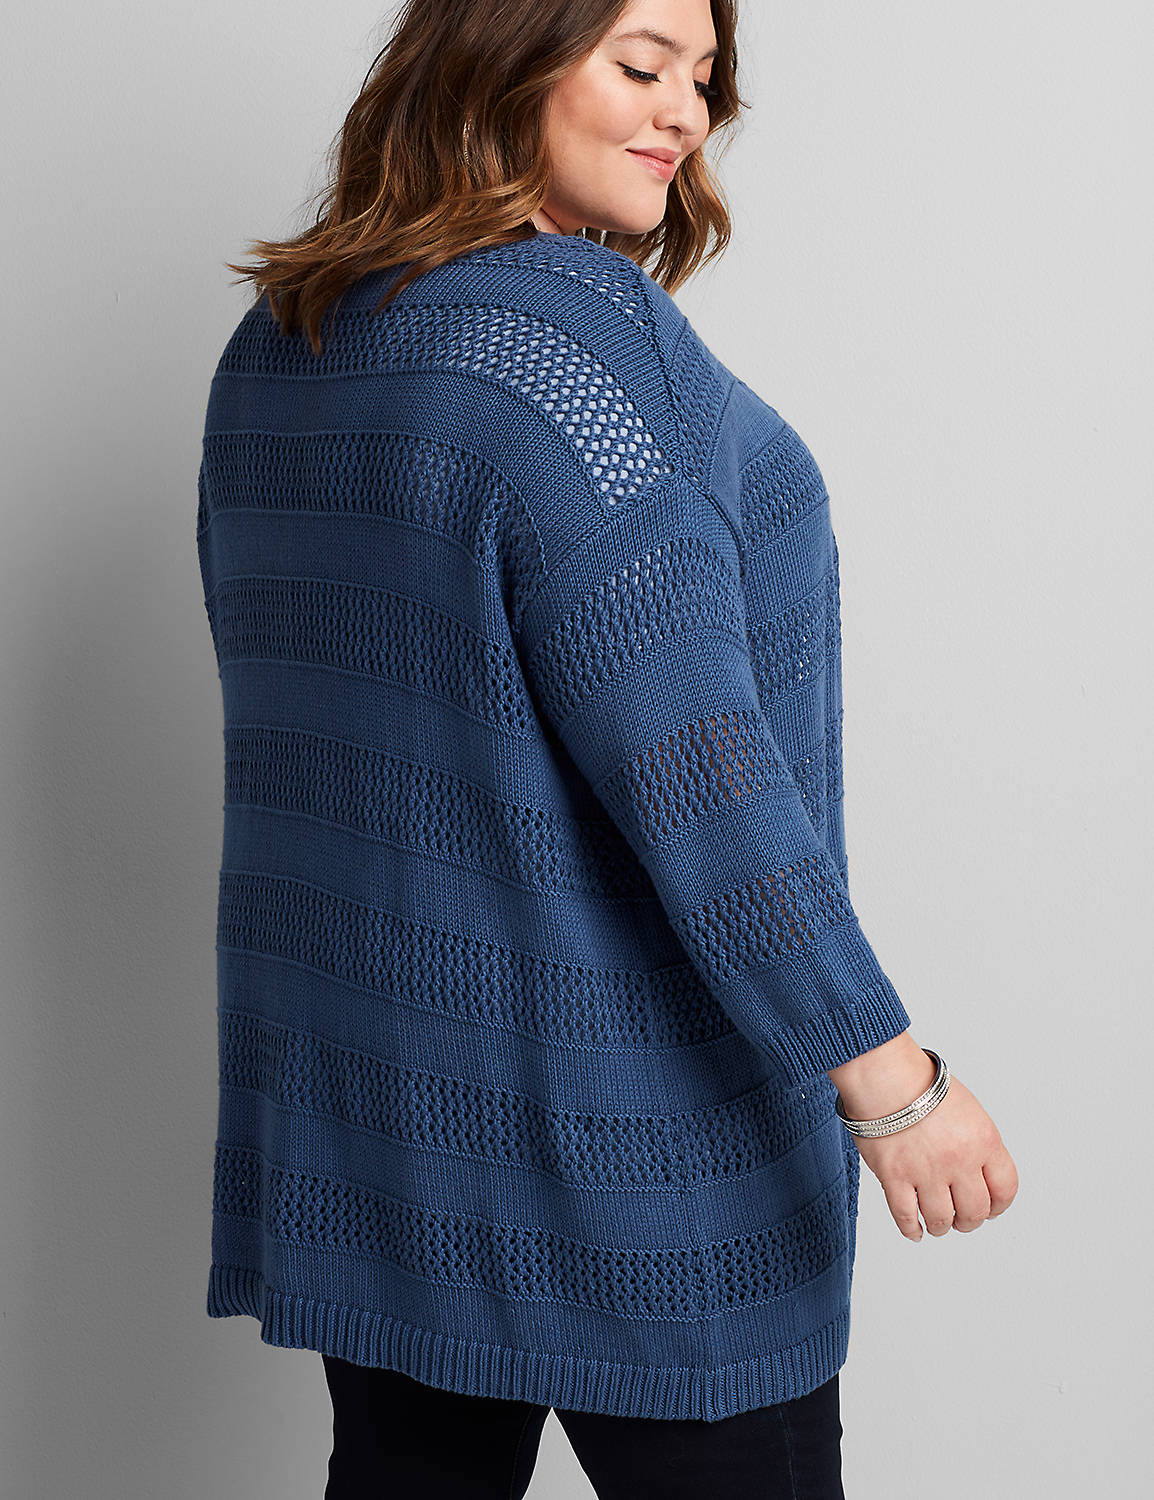 Three-Quarter Sleeve Flat Front Overpiece in Open Stitch 1114615:PANTONE Bijou Blue:10/12 Product Image 2